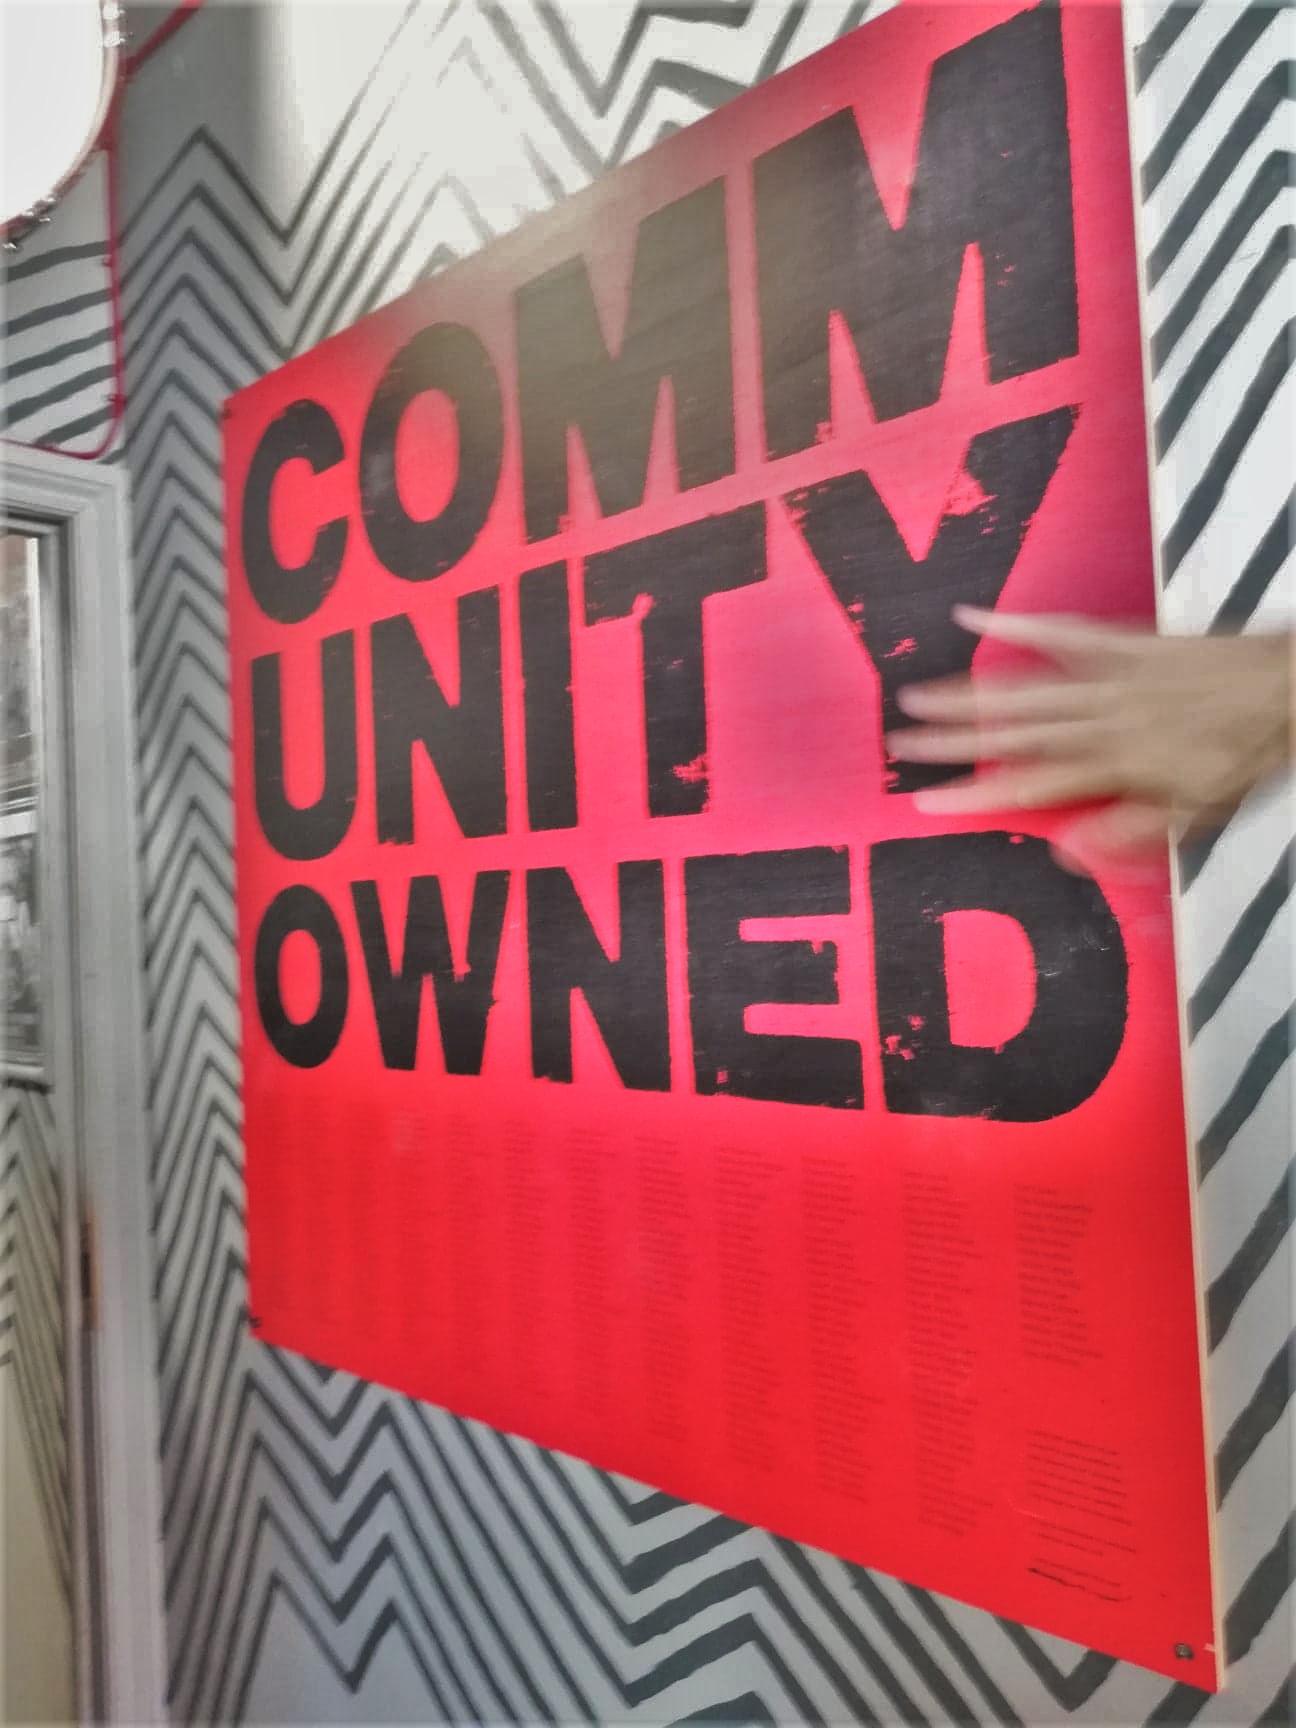 The Exchange Community Owned Poster naming all the community shareholders